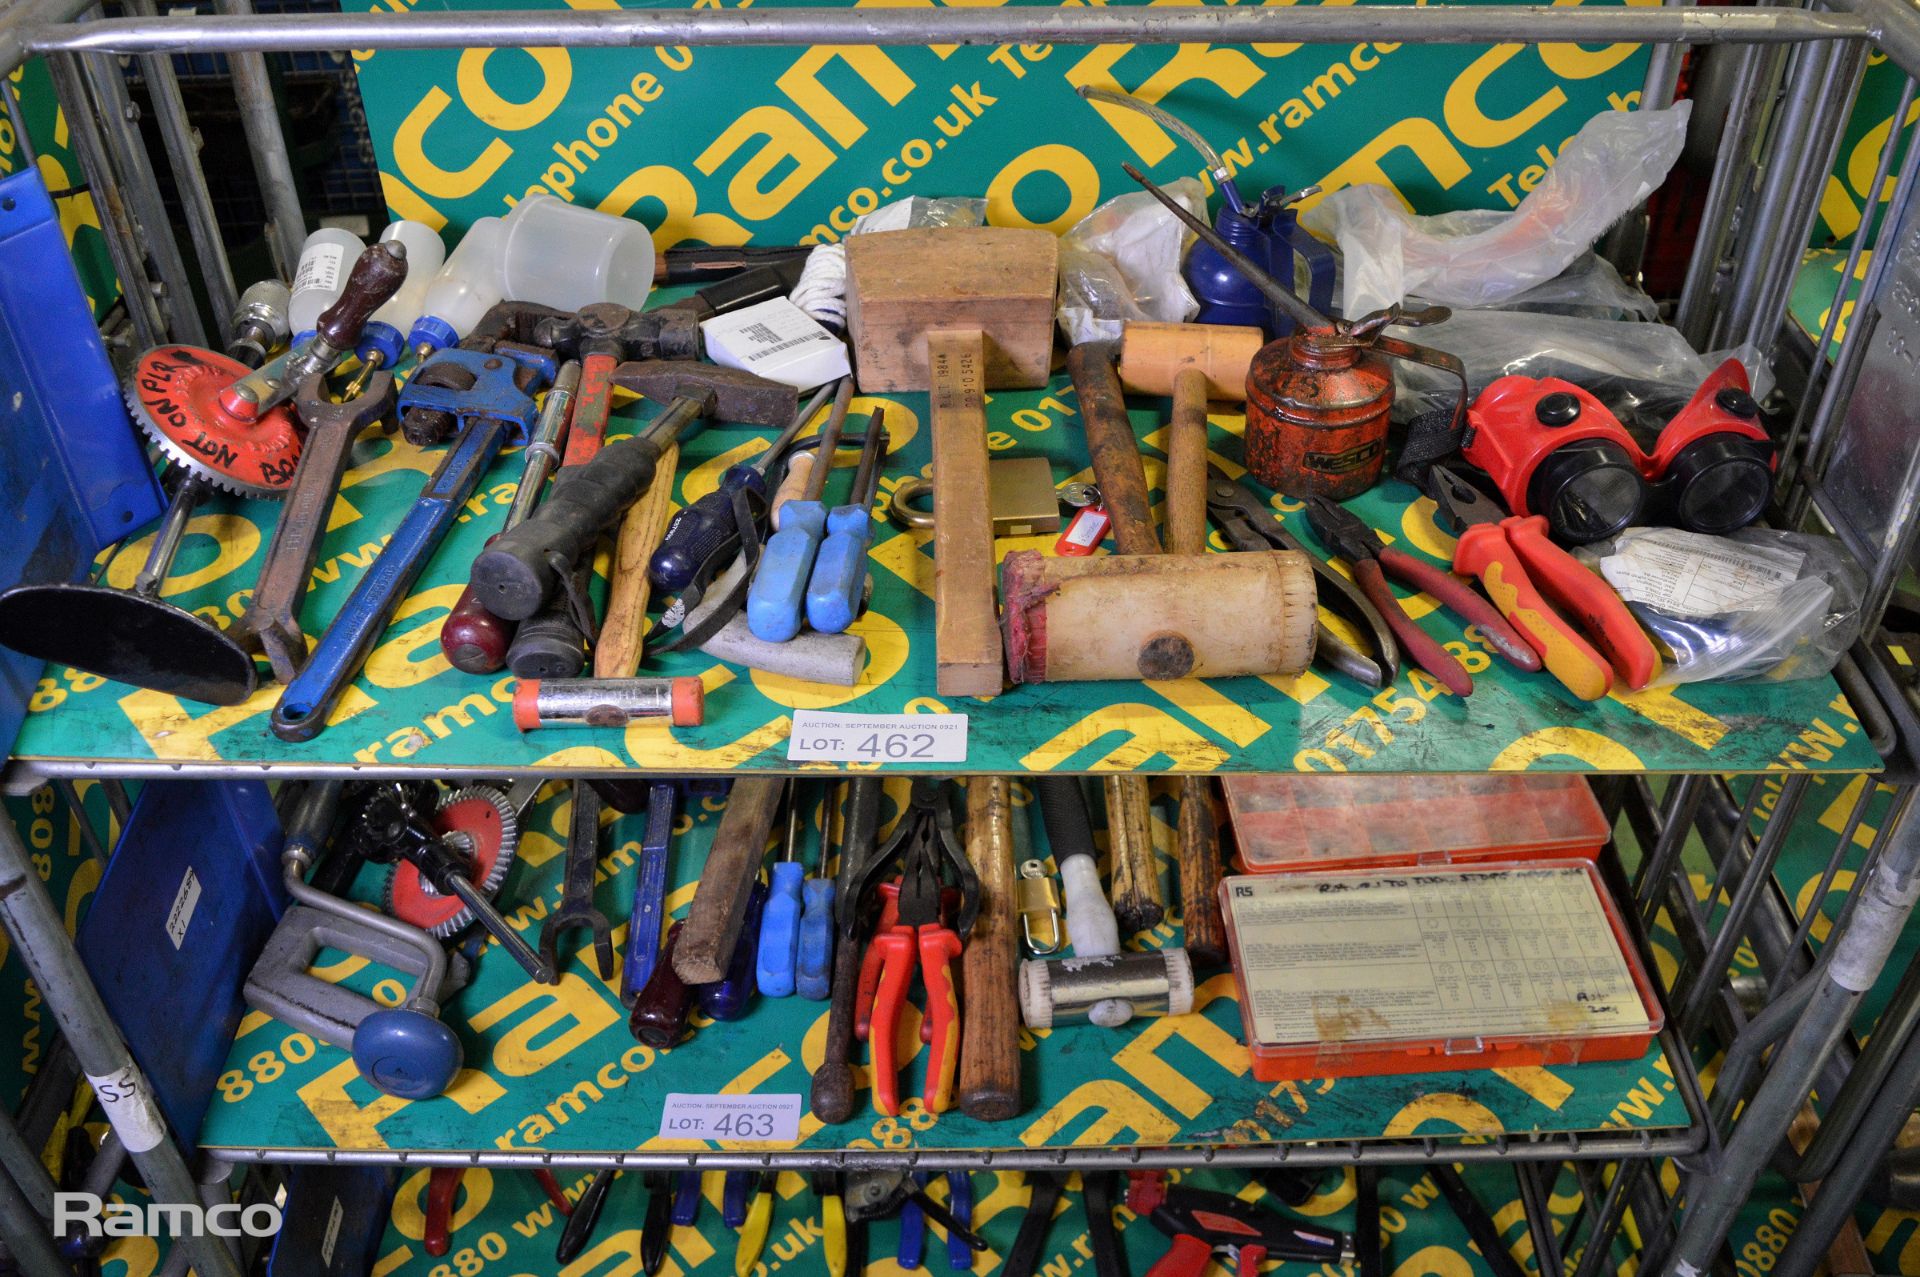 Hand Tools - Mallet, Goggles, Hammer, Screwdriver, hand drill, oil cans, pliers, wrench